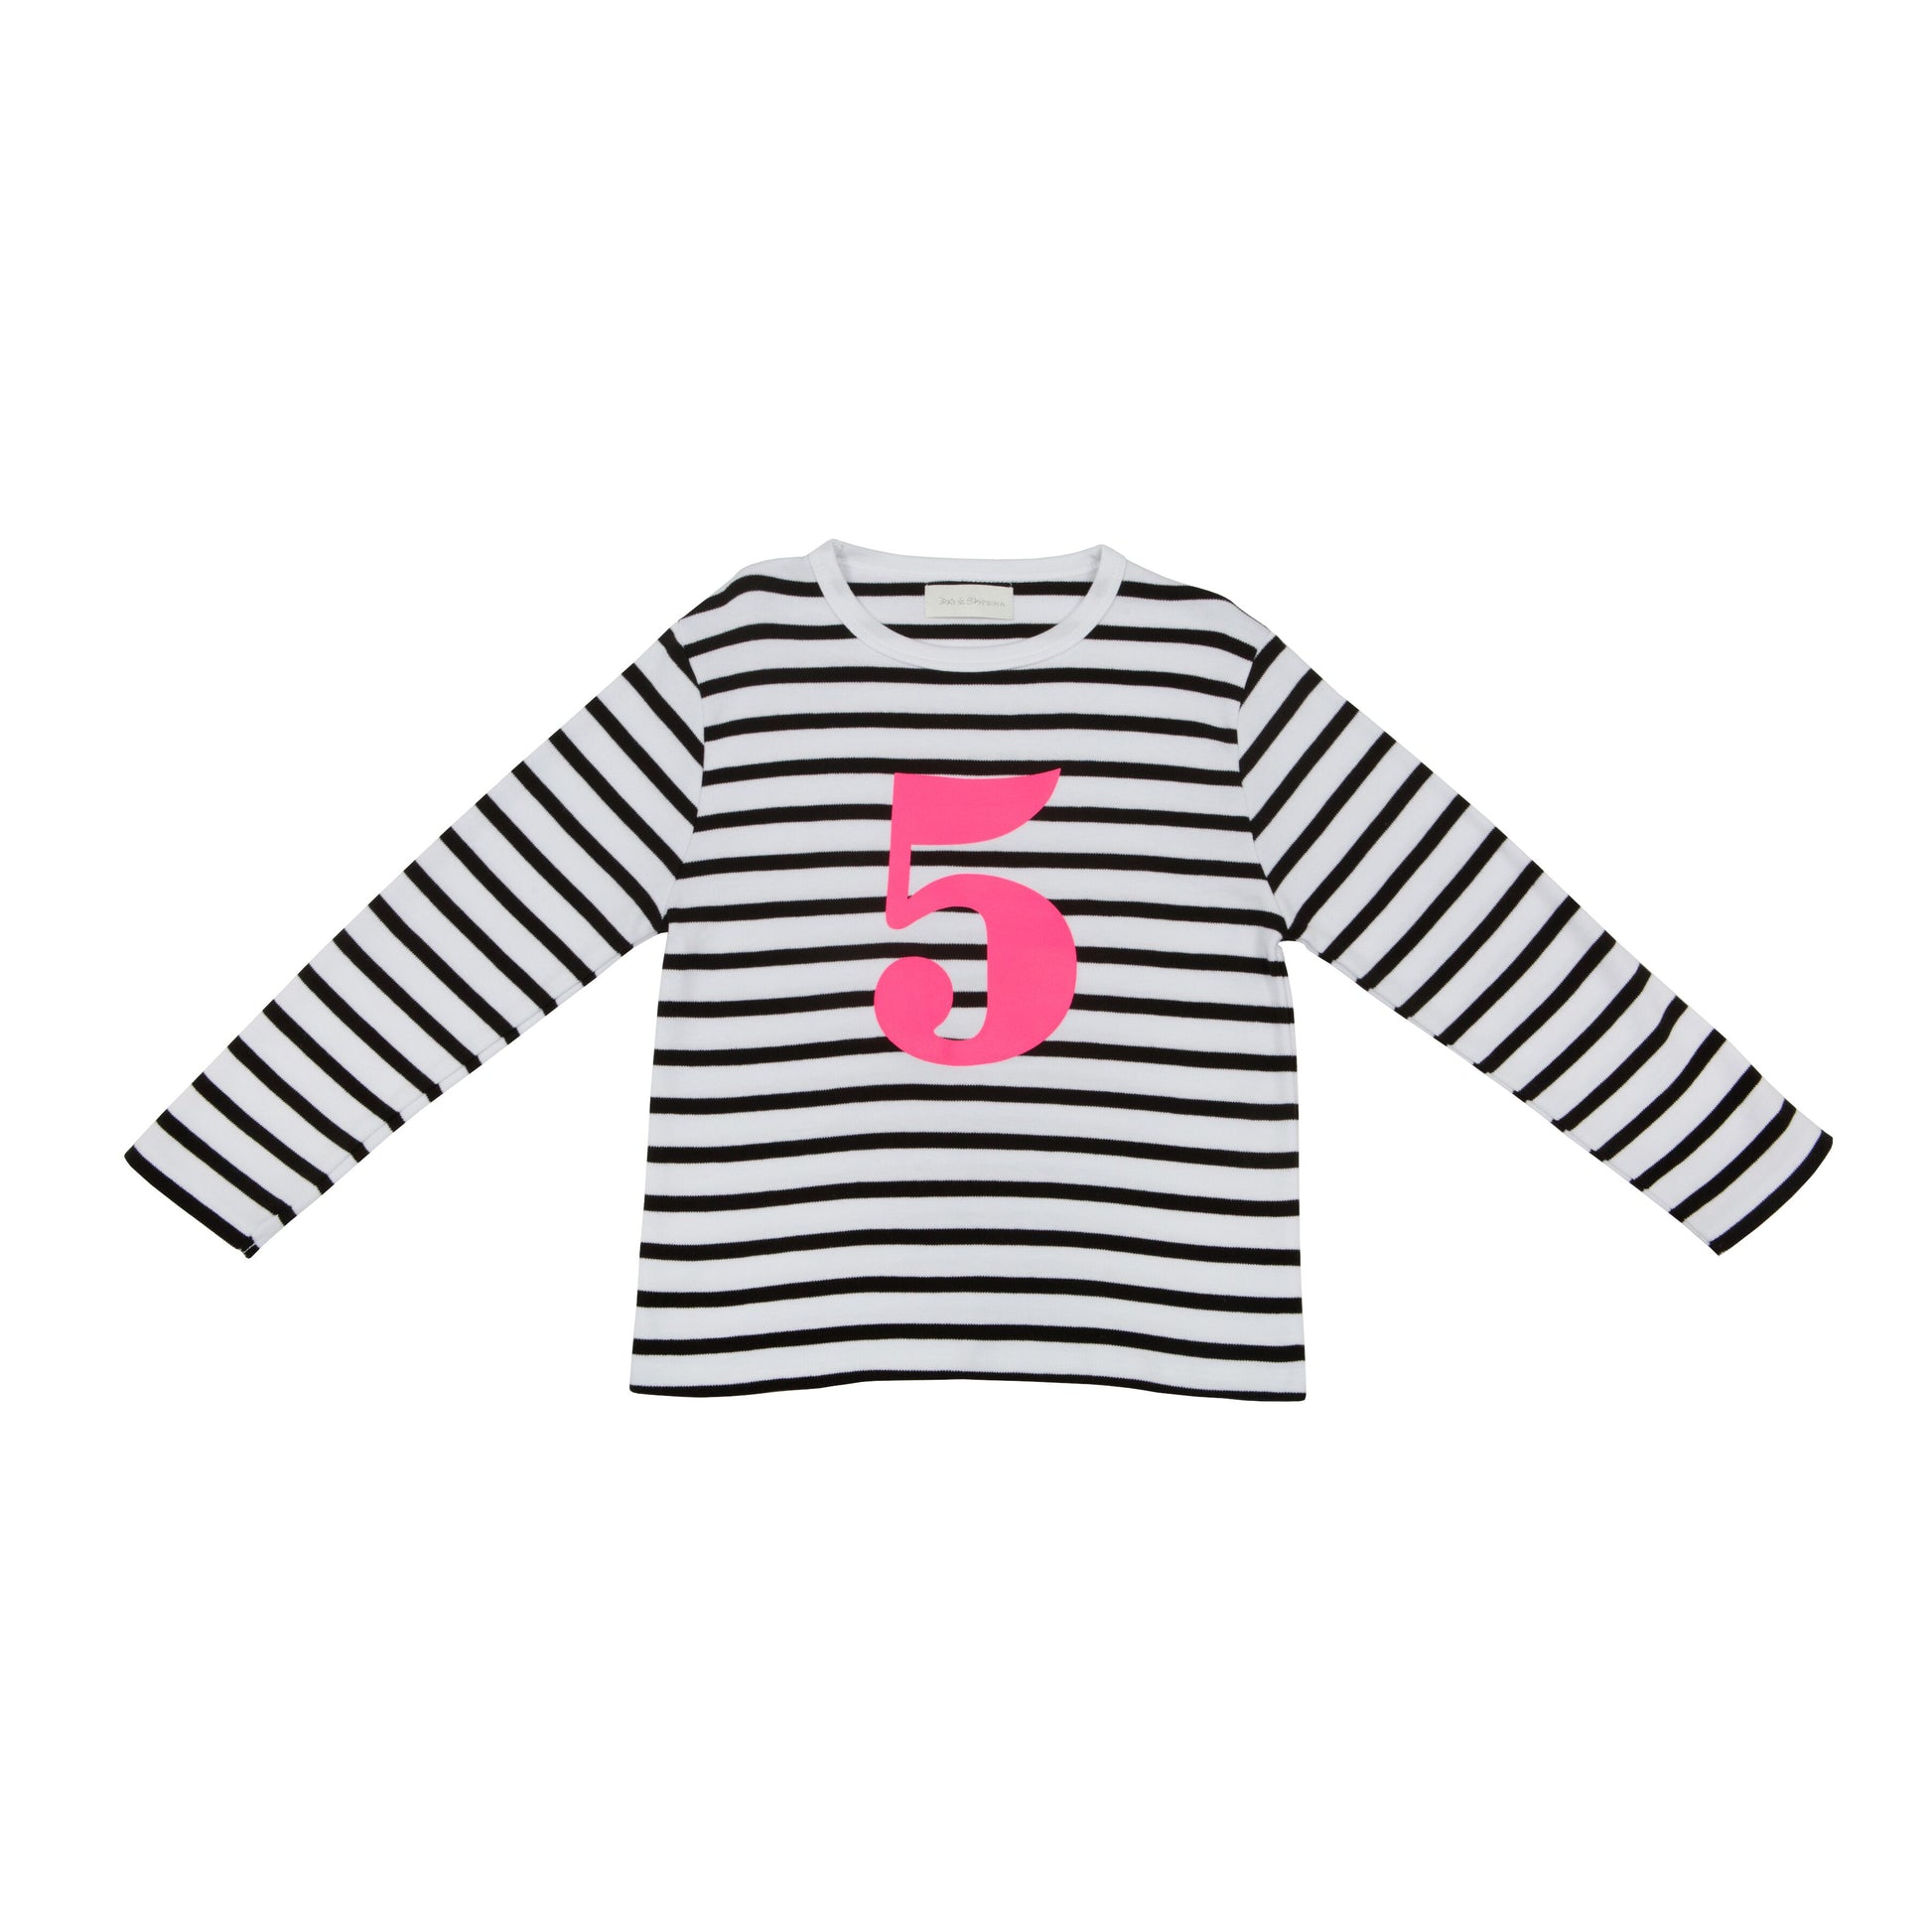 Bob & Blossom black and white striped long sleeved t shirt with hot pink number 5